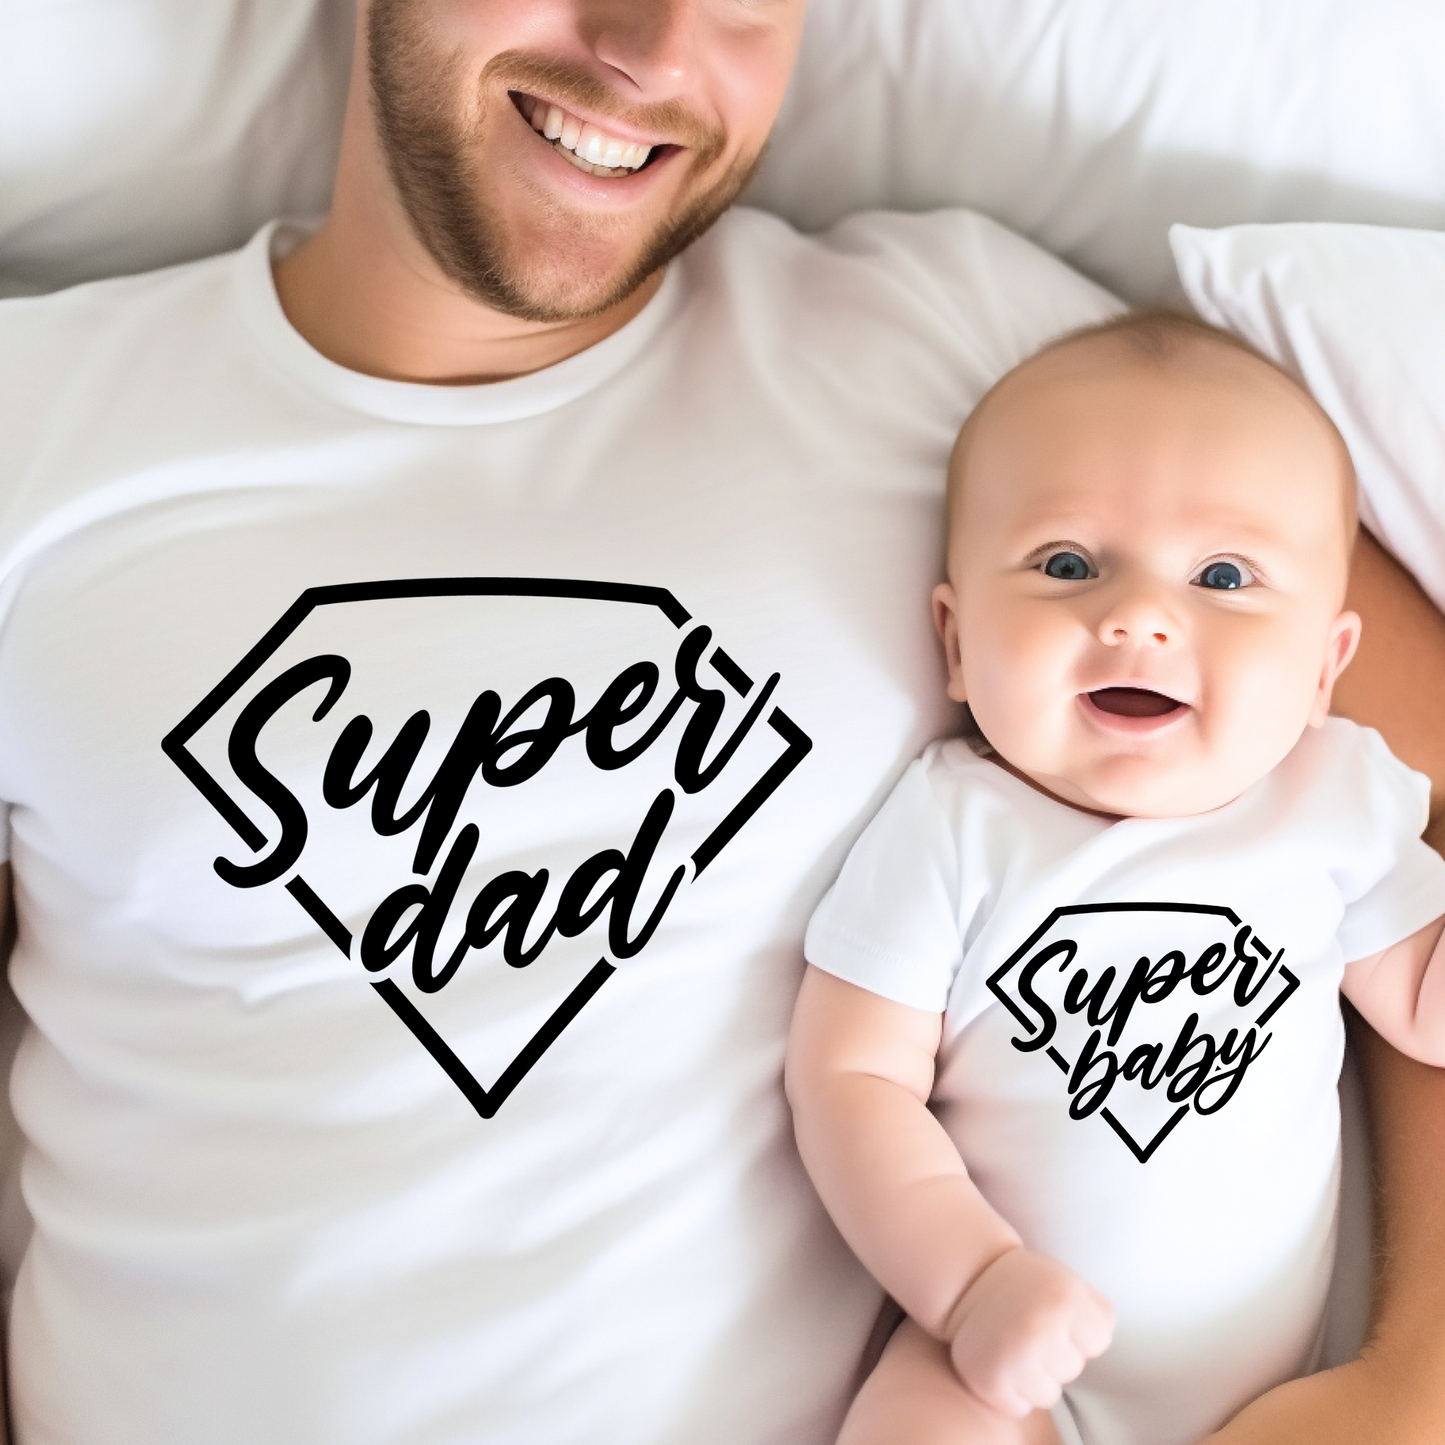 Super Dad, Super Baby - Daddy and Baby Matching Outfit